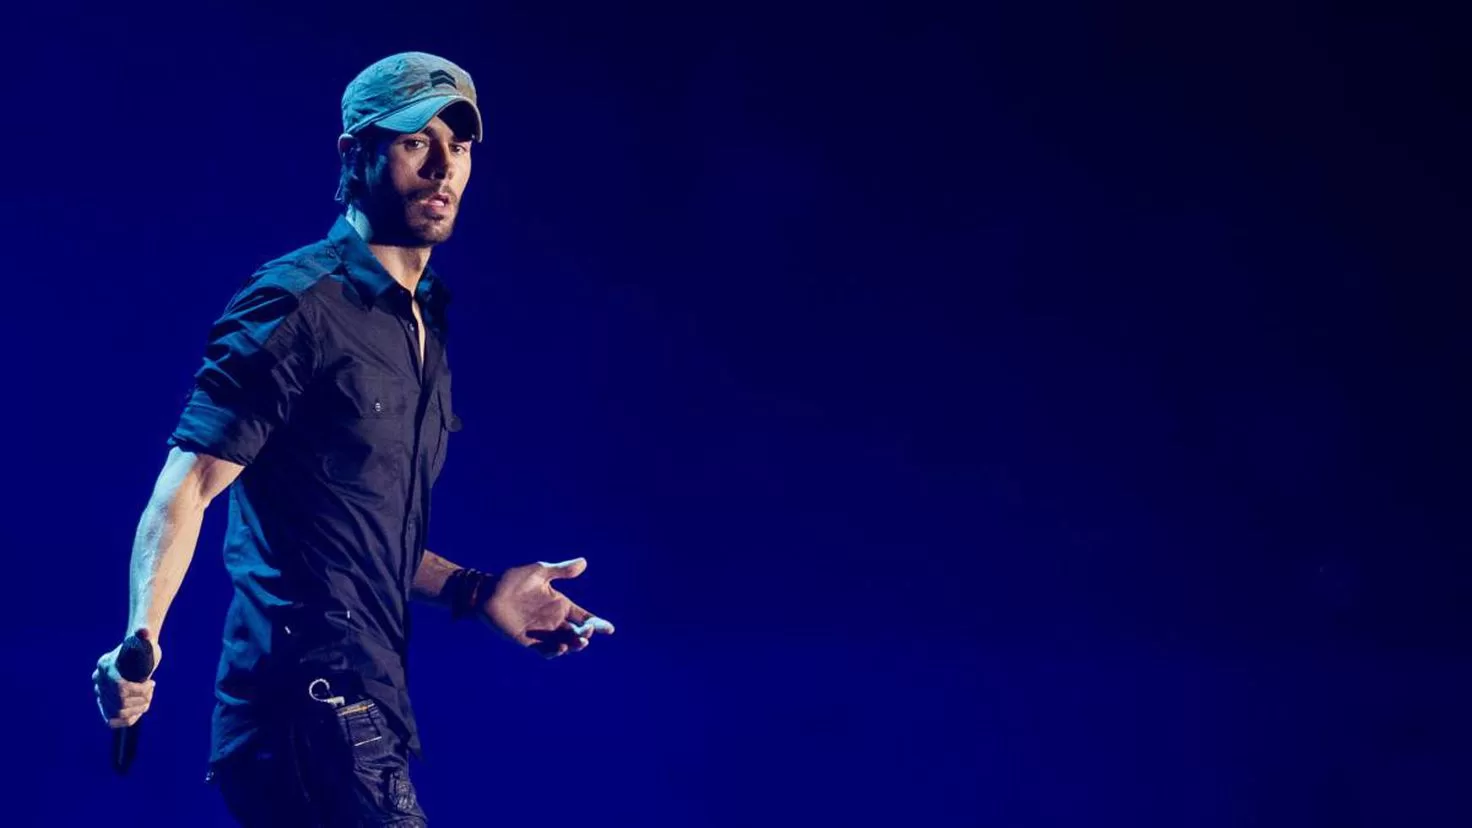 The disease that Enrique Iglesias carries: 20,000 people suffer from it
